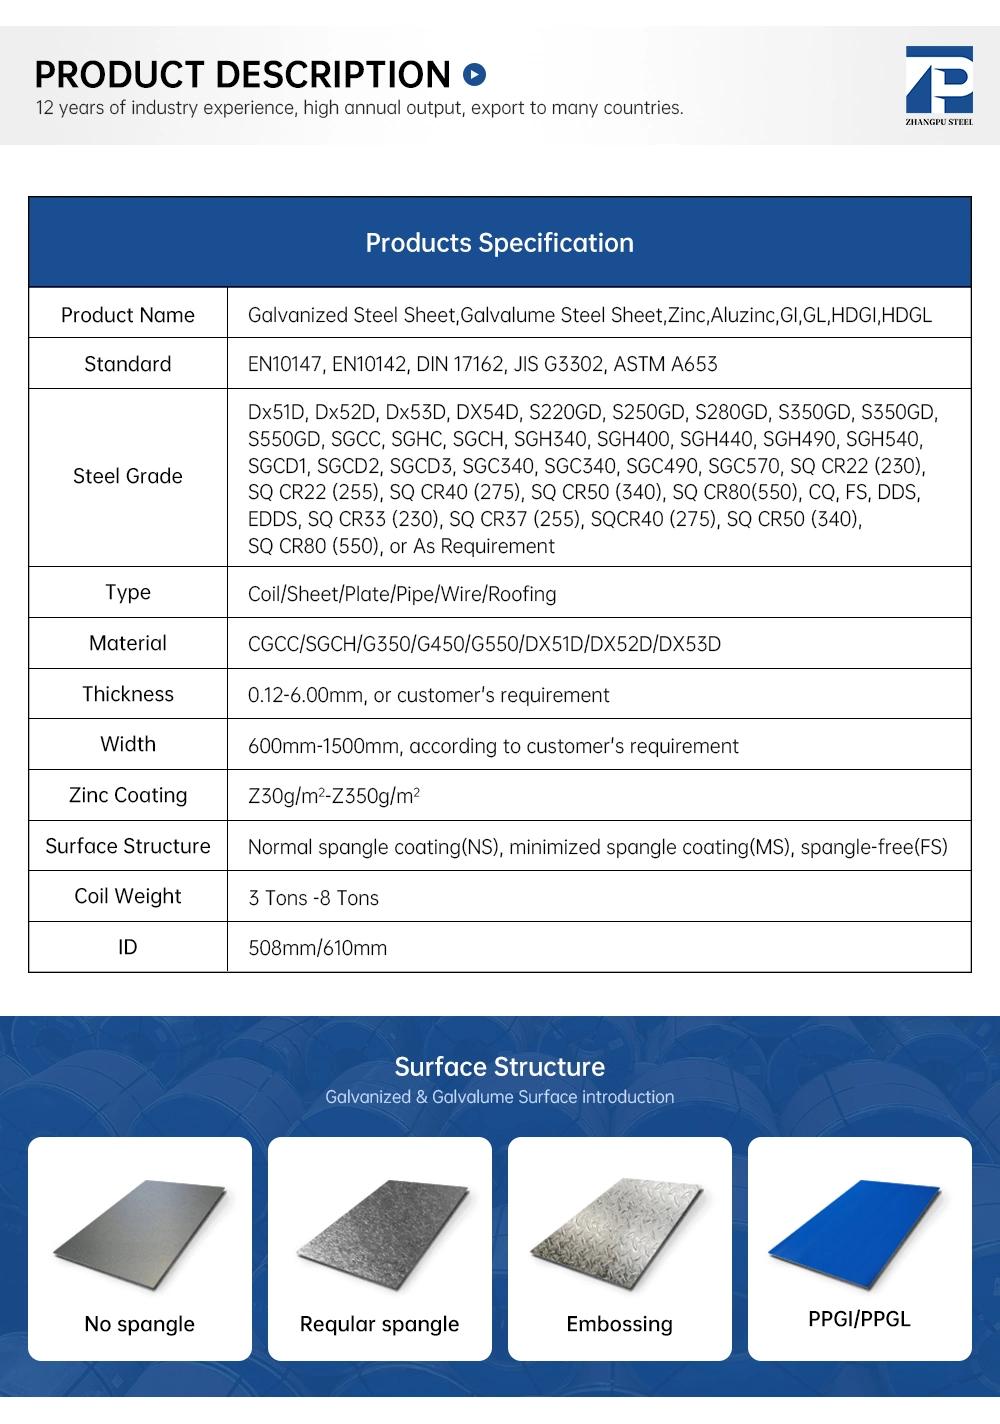 PPGI/HDG/Gi/Secc Dx51 Zinc Coated Cold Rolled/Hot Dipped Galvanized Steel Coil/Sheet/Plate/Metals Iron Steel